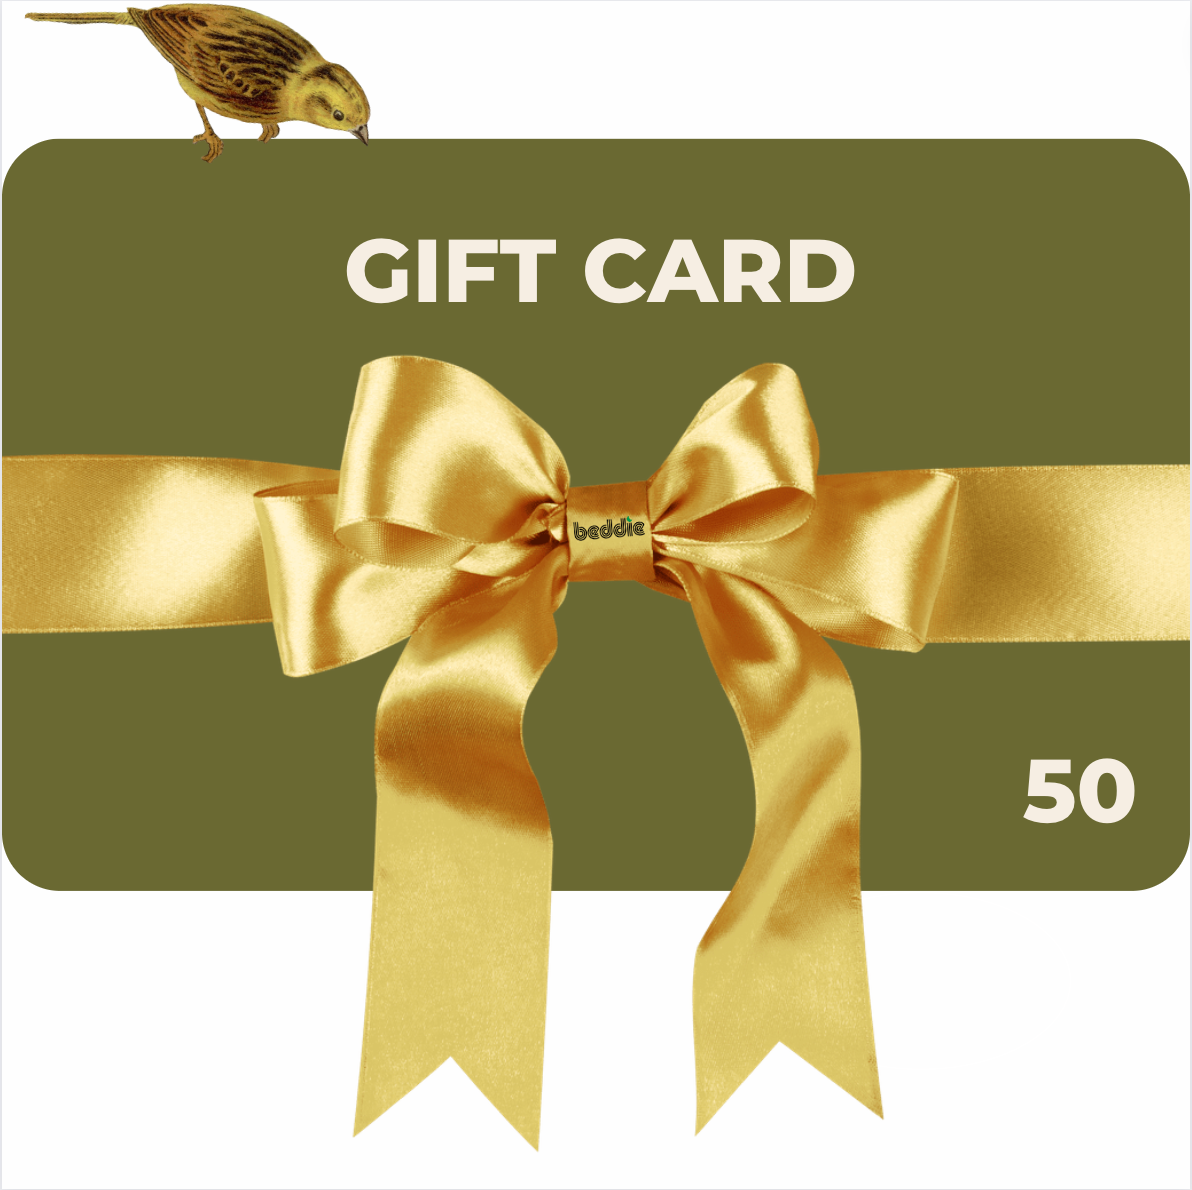 Beddie Gift Card $50. Easy way to buy a gift!